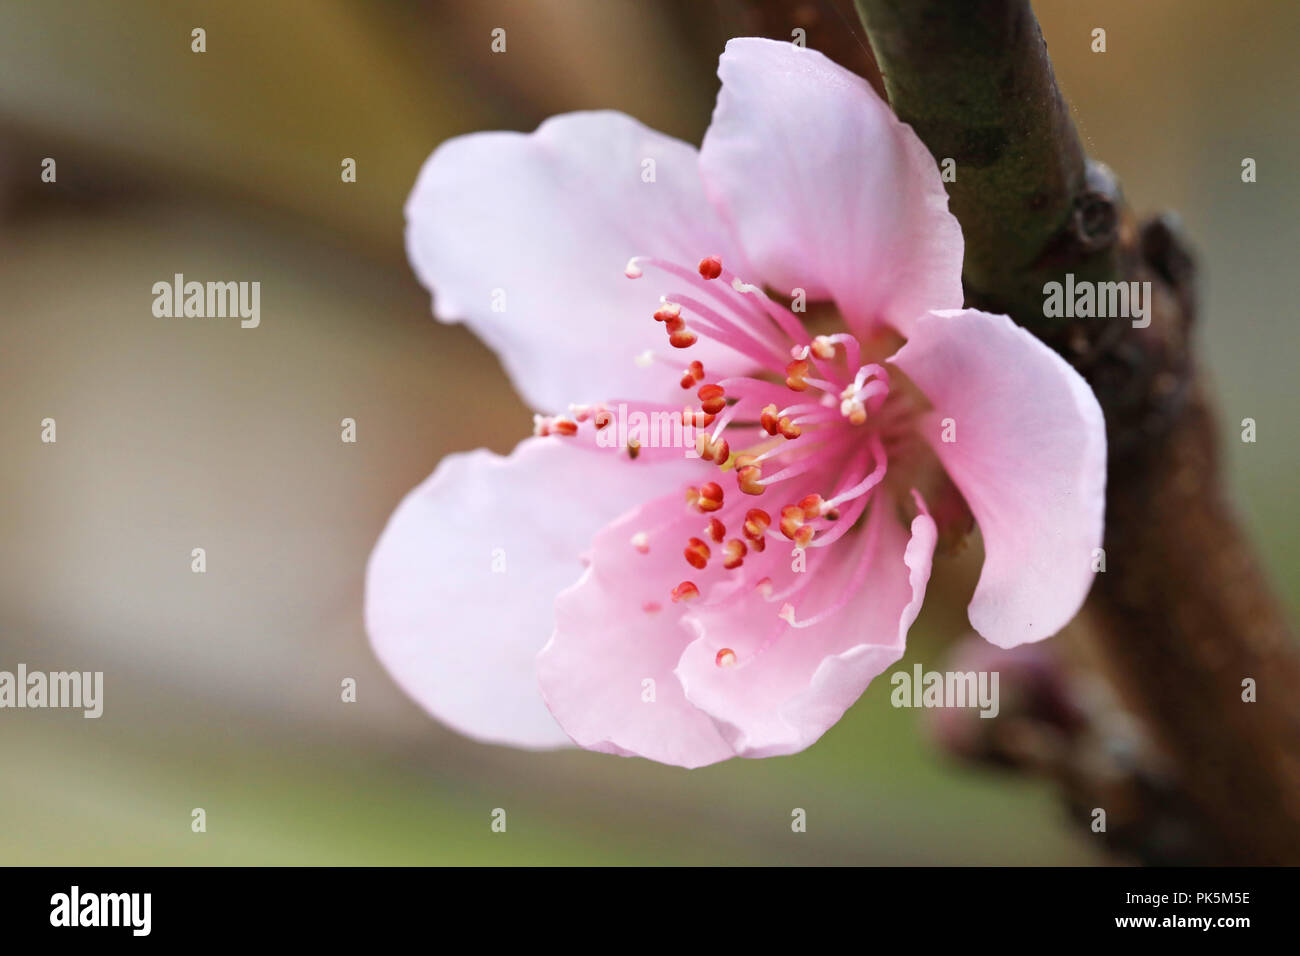 macro close up of a new season spring peach blossom. beautiful delicate pink soft petal and flower. change of season, fertility seasons concept with f Stock Photo